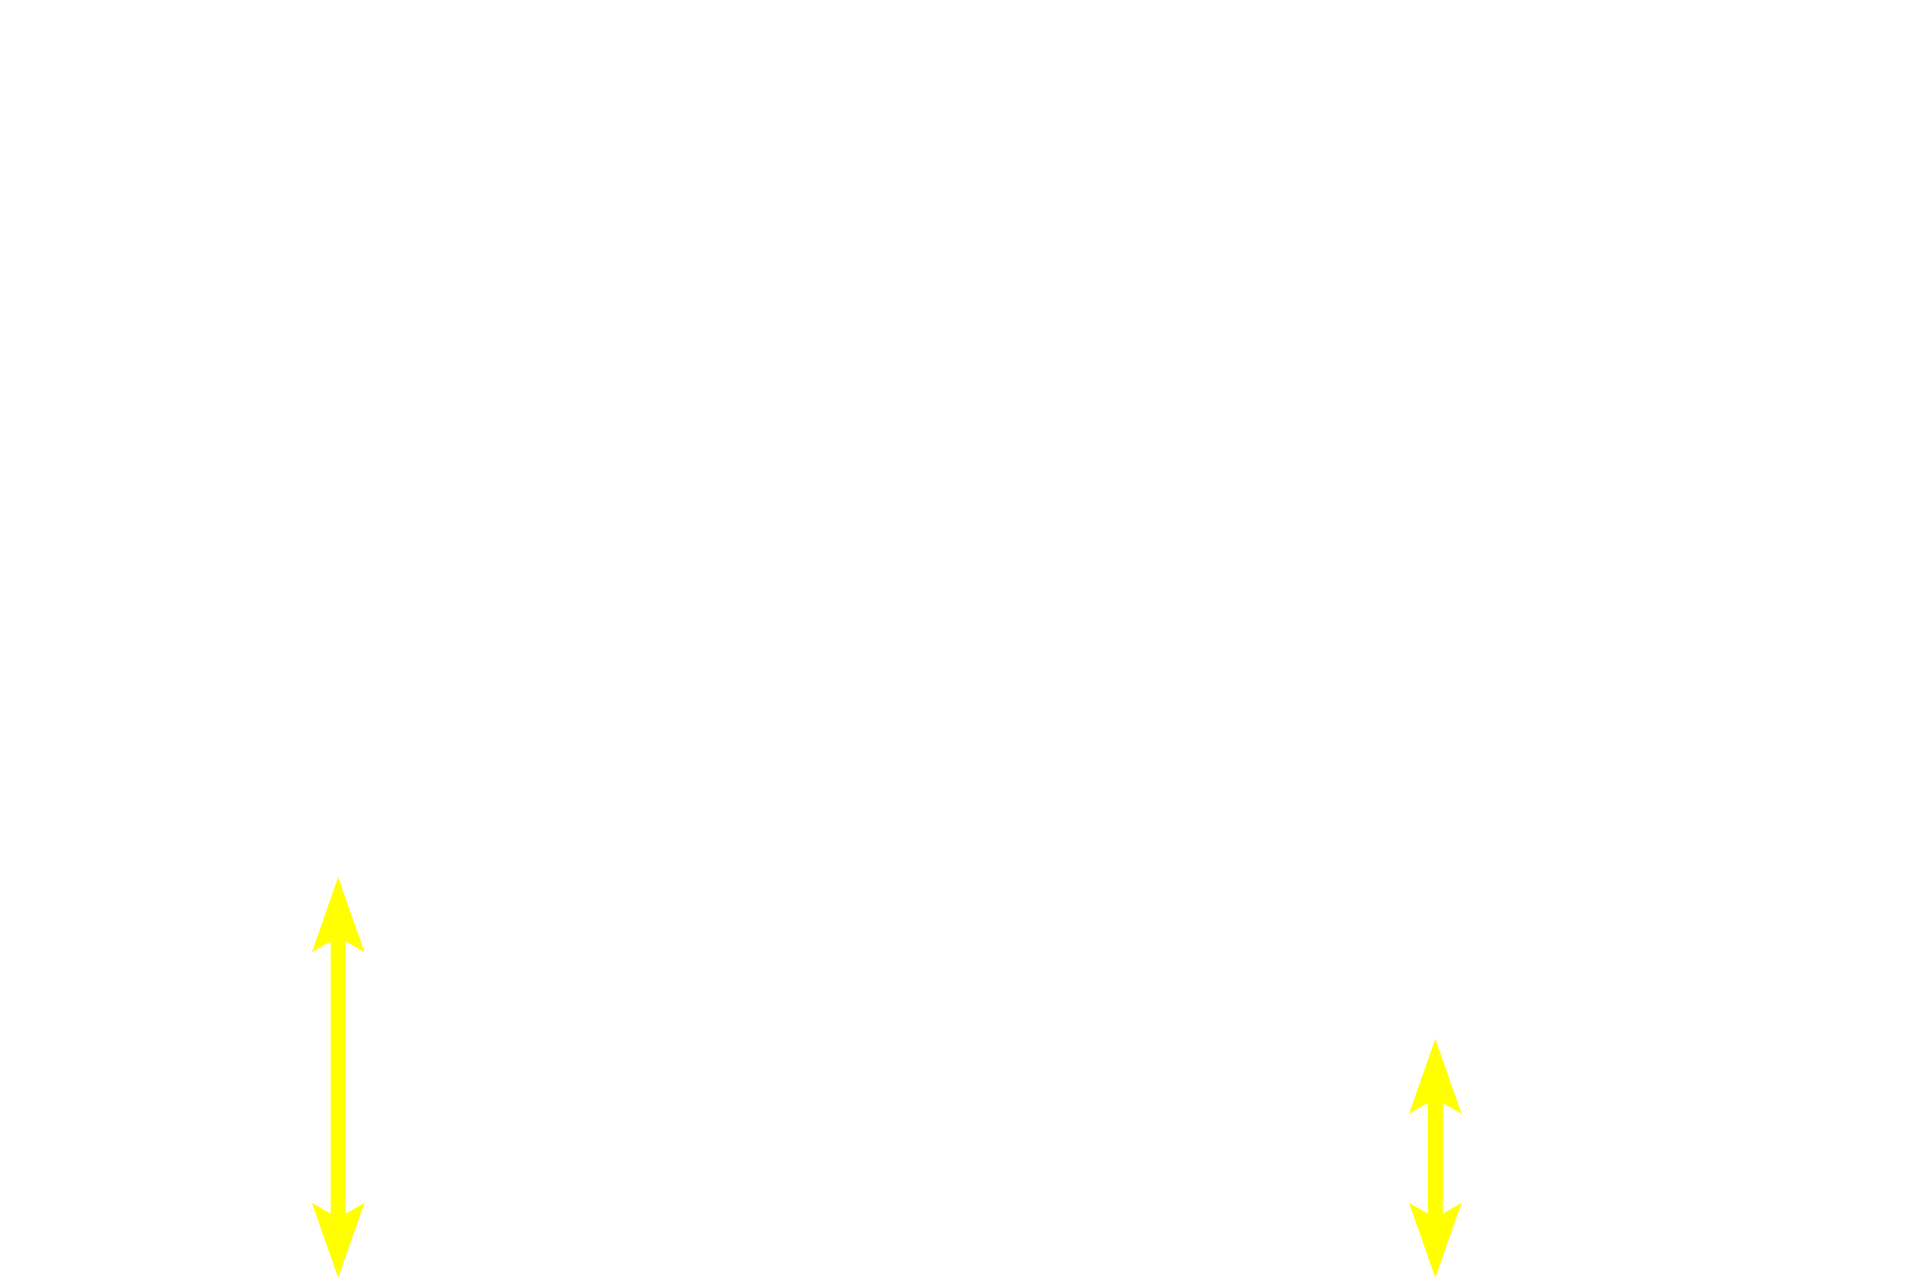 Sclera <p>At the fovea, bipolar and ganglion cells and their processes are shifted peripherally, leaving only cones at the central area, the foveola. This displacement allows for an unimpeded light path to the foveola.  The foveola perceives less than one degree of arc over the entire visual field and, thus, minute movements of the eyeball (saccades) are necessary to maintain this foveal resolution on objects of interest.</p>
